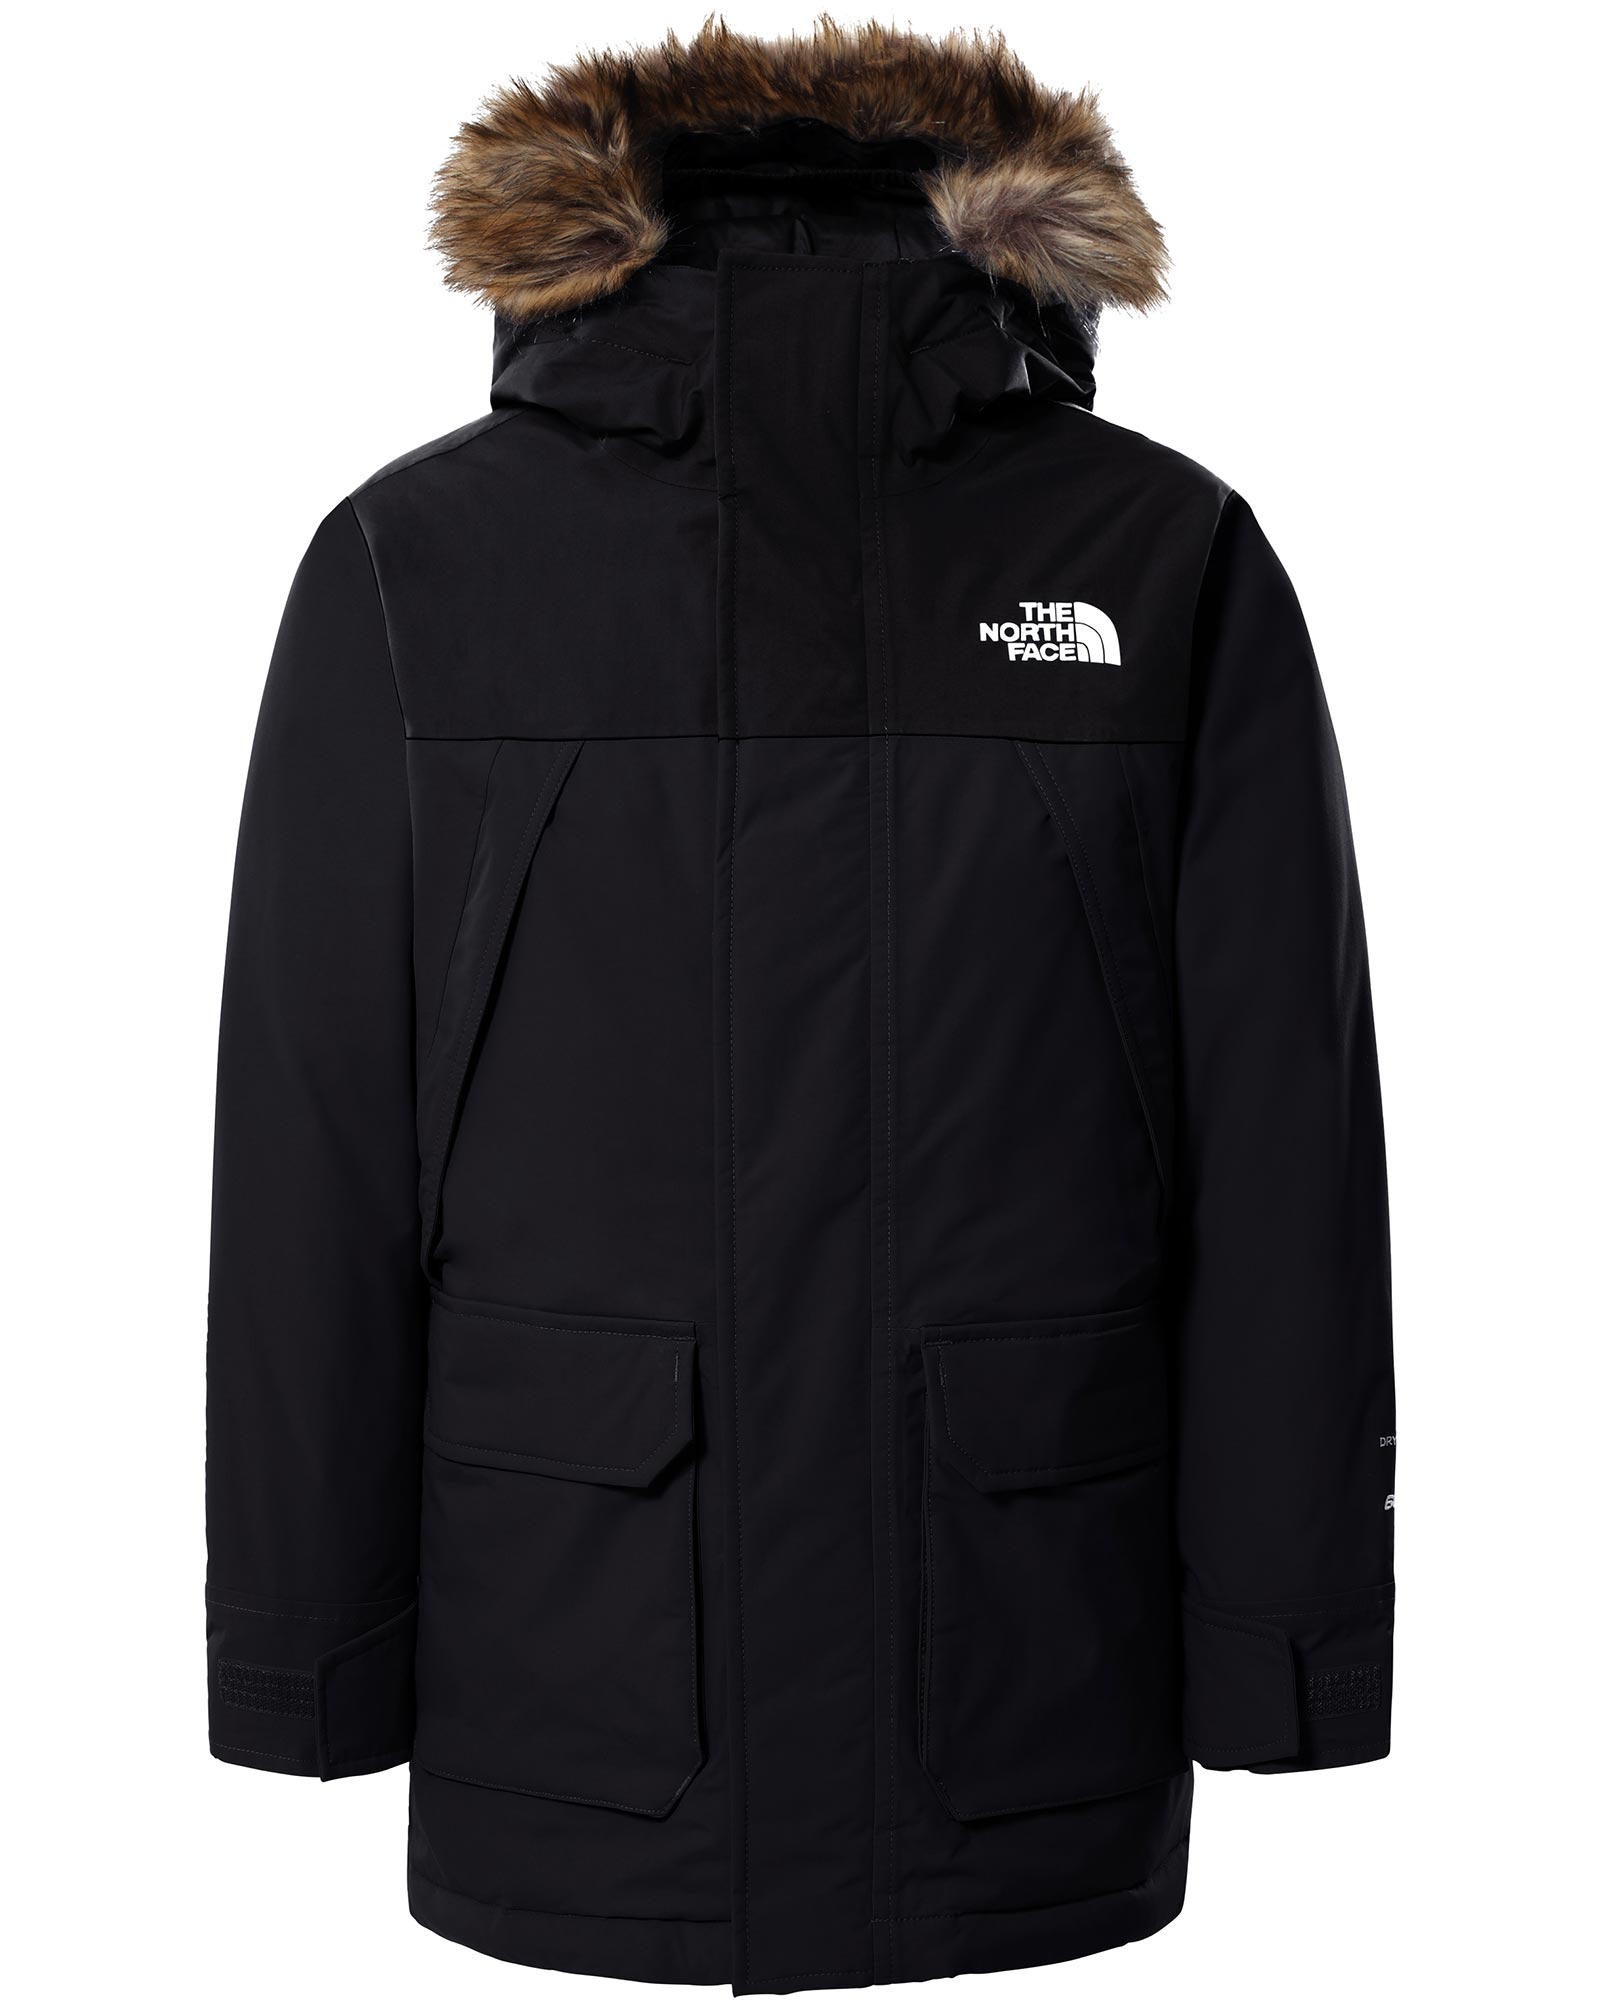 Product image of The North Face McMurdo Boys' Parka Jacket XL